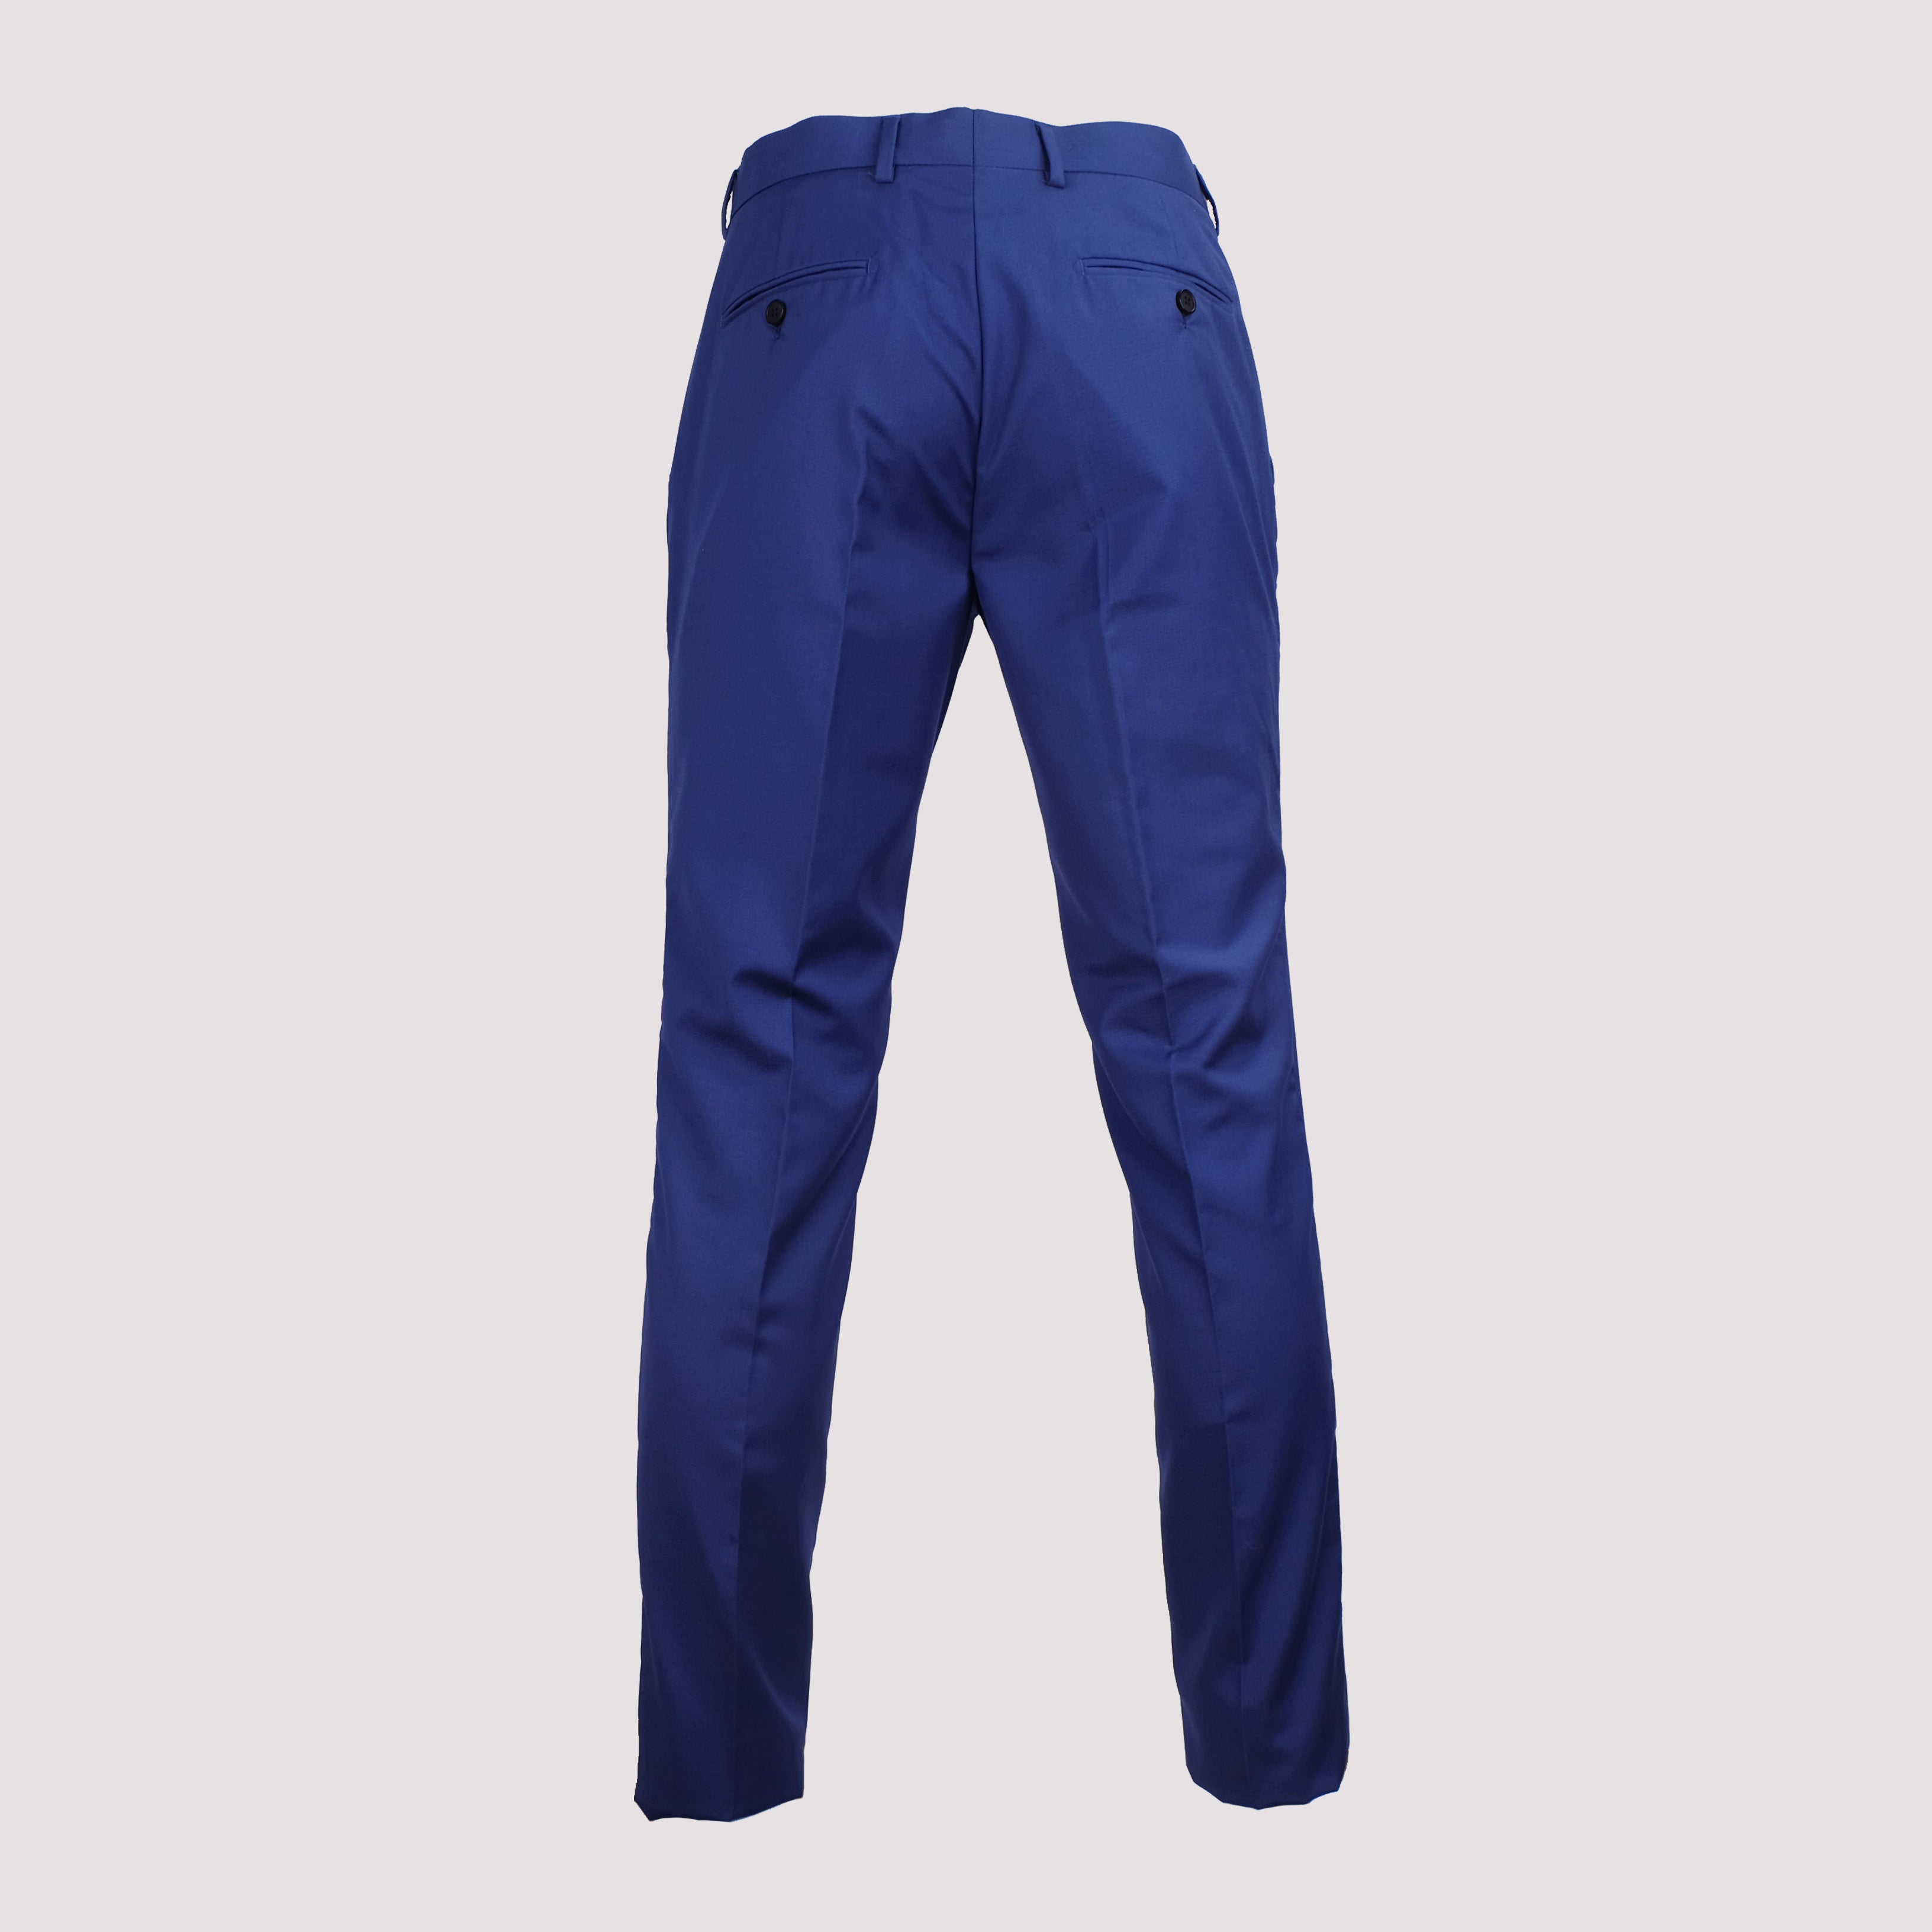 Extra Slim Fit Trousers